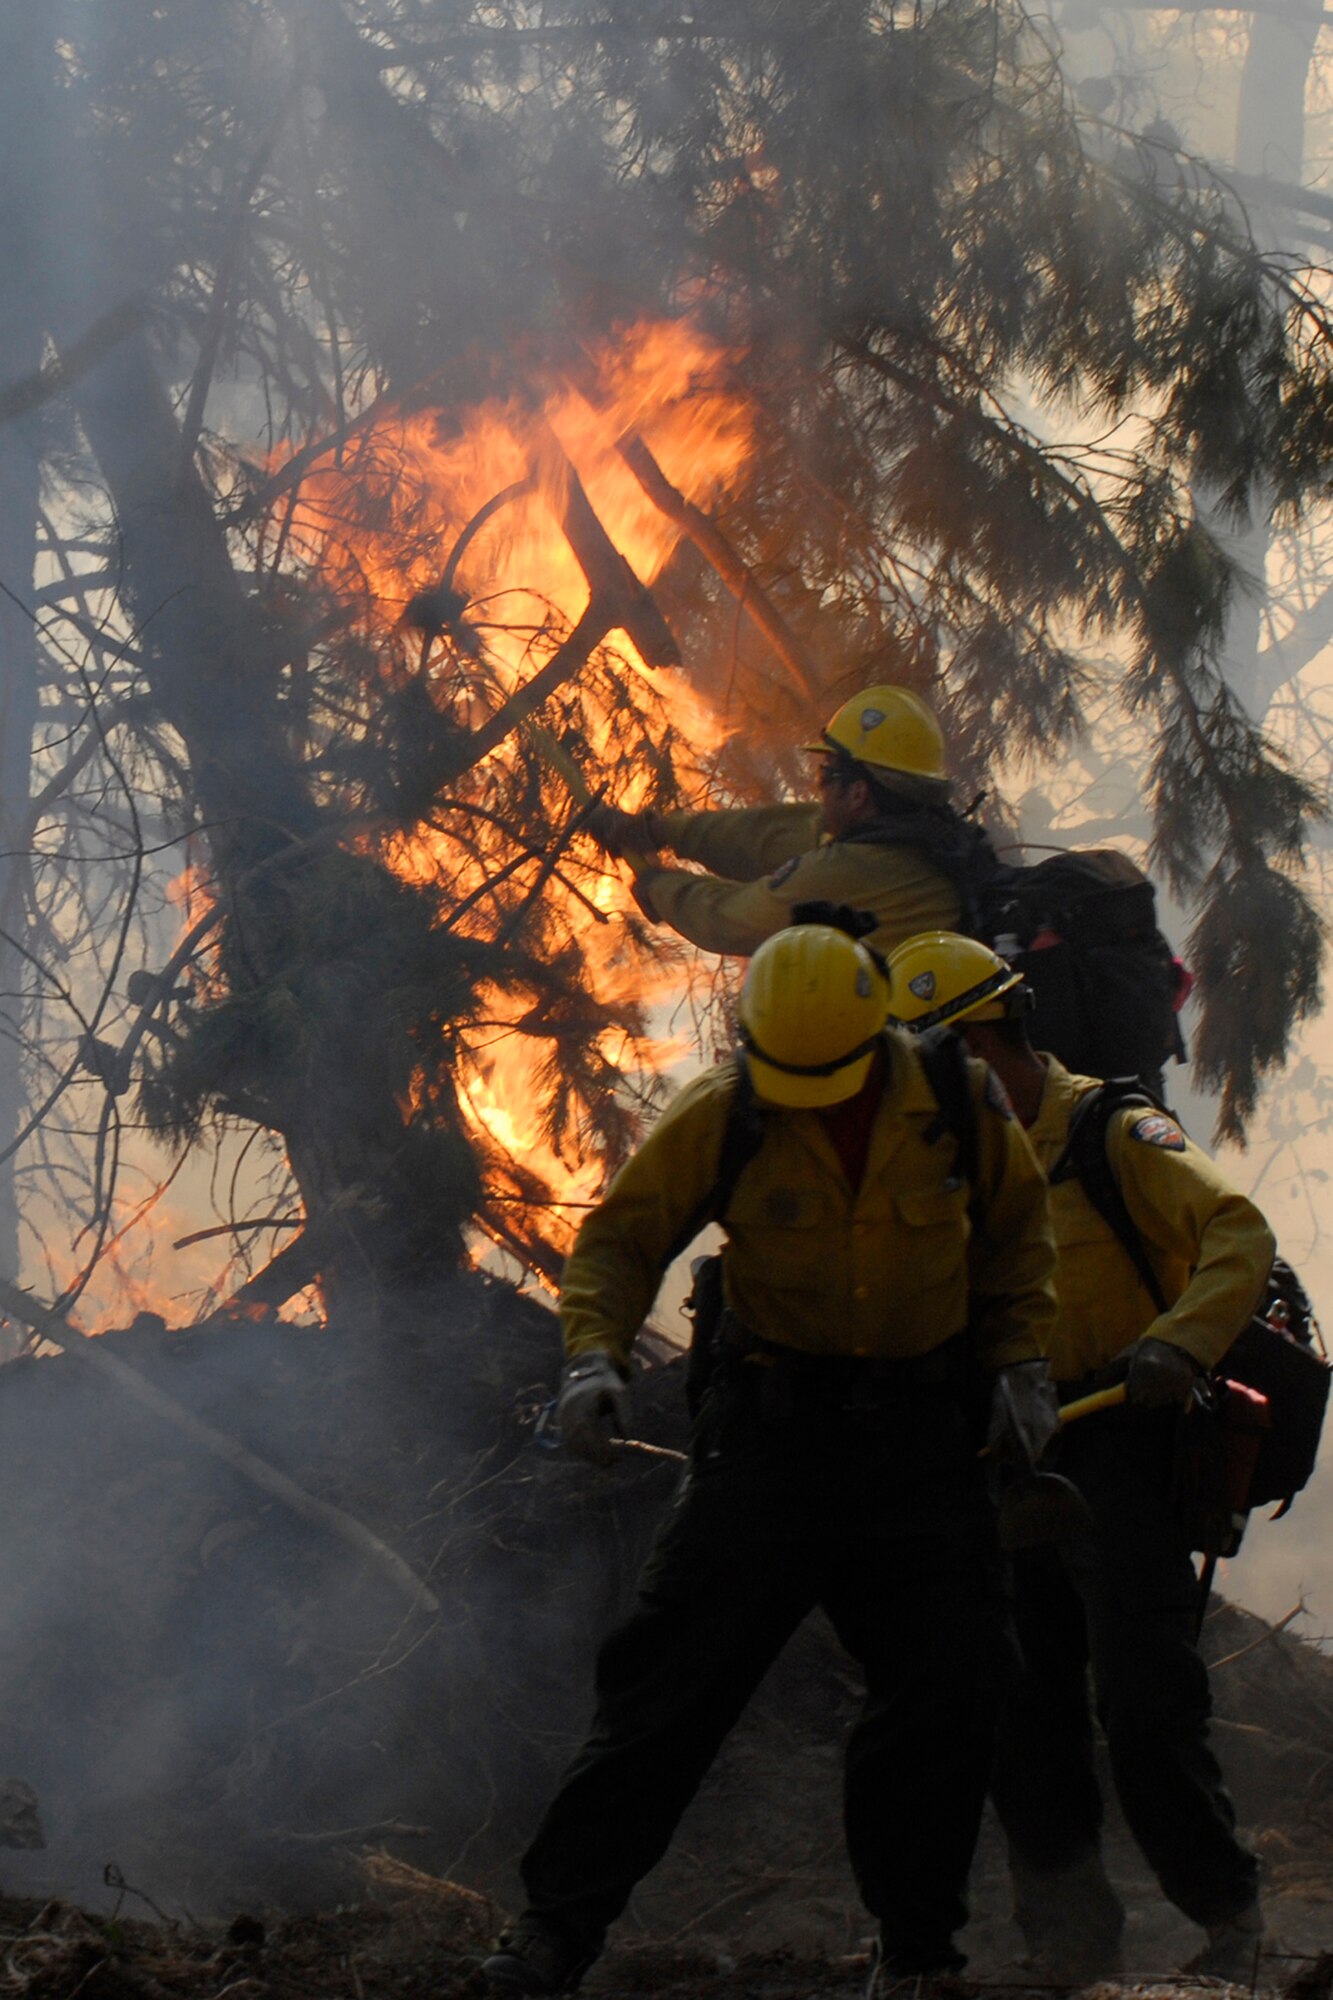 VANDENBERG AIR FORCE BASE, Calif. – Firefighters use tactical skills to battle the blaze that burned through more than 600 acres here Sept. 30. Firefighters from base and local agencies contributed to containing the fire. (U.S. Air Force photo/Senior Airman Andrew Satran)
